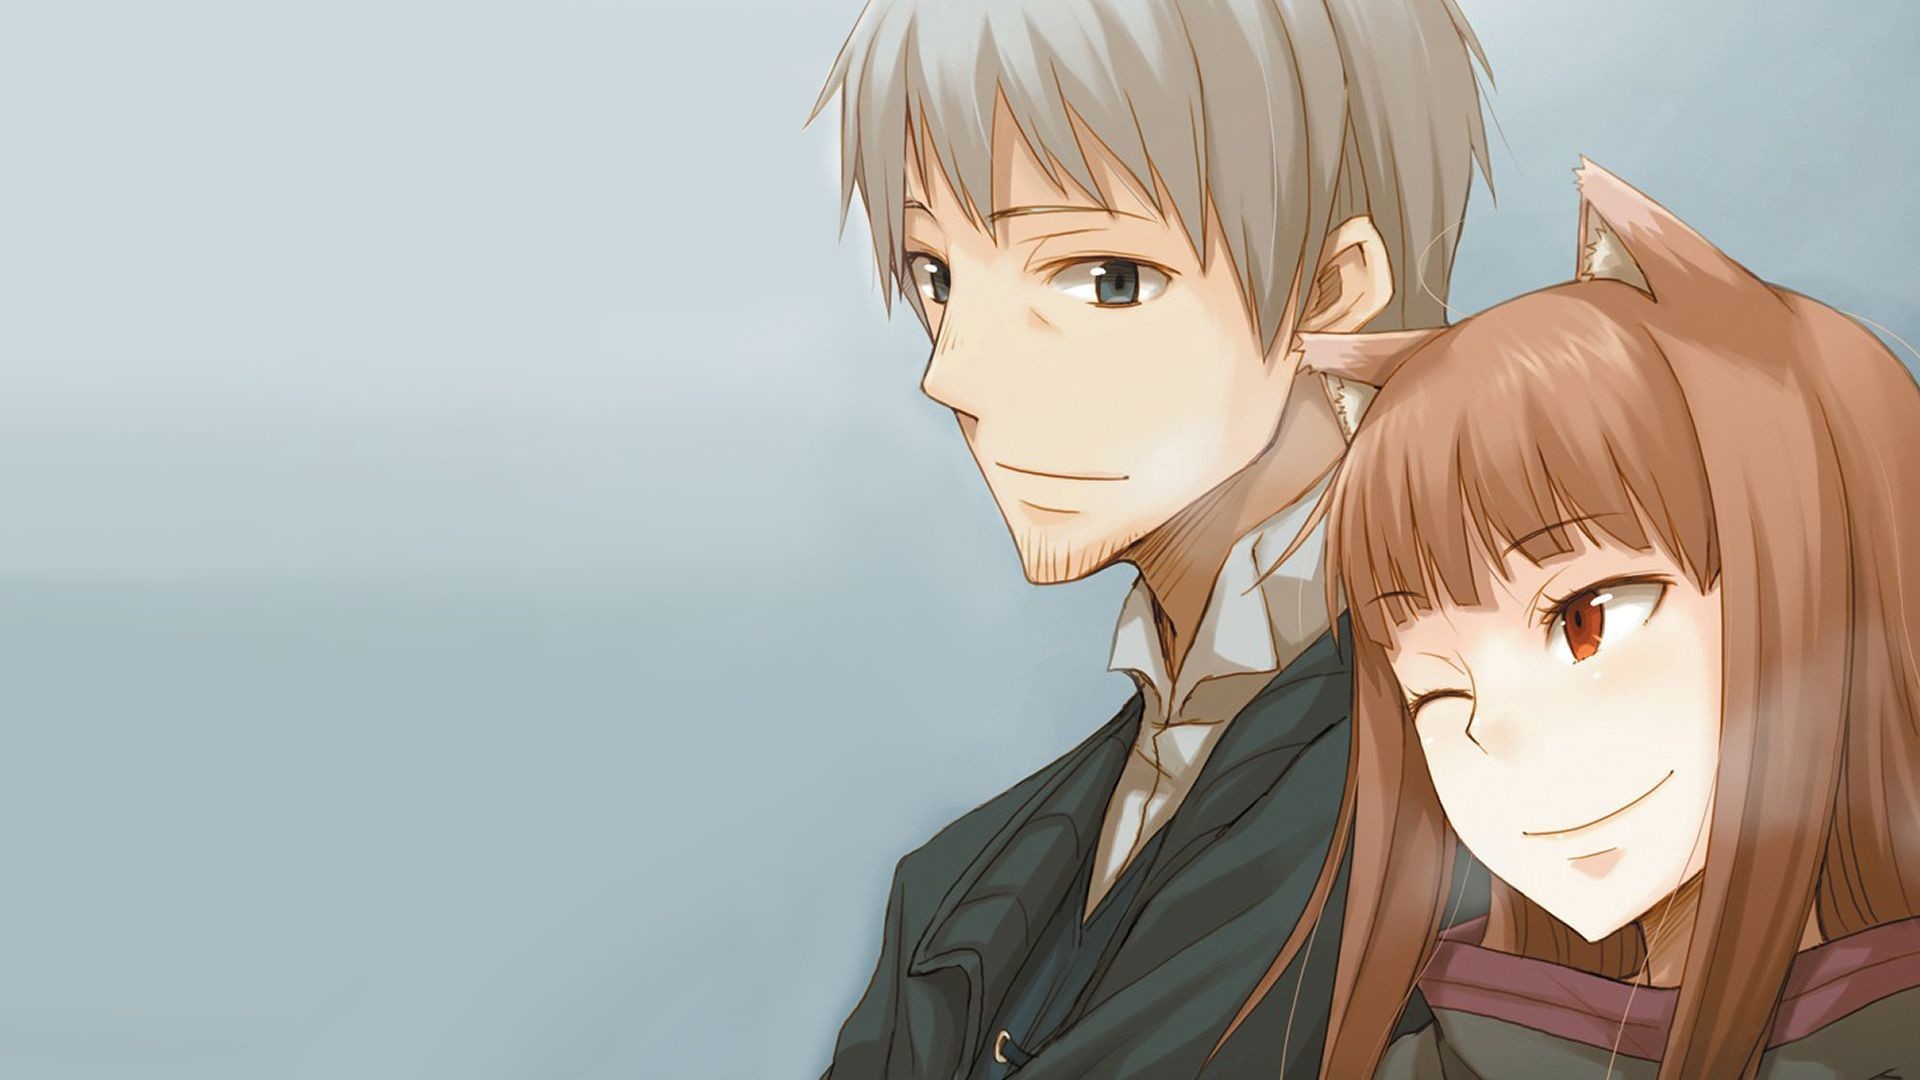 … Spice And Wolf Widescreen Wallpaper – #7223 …